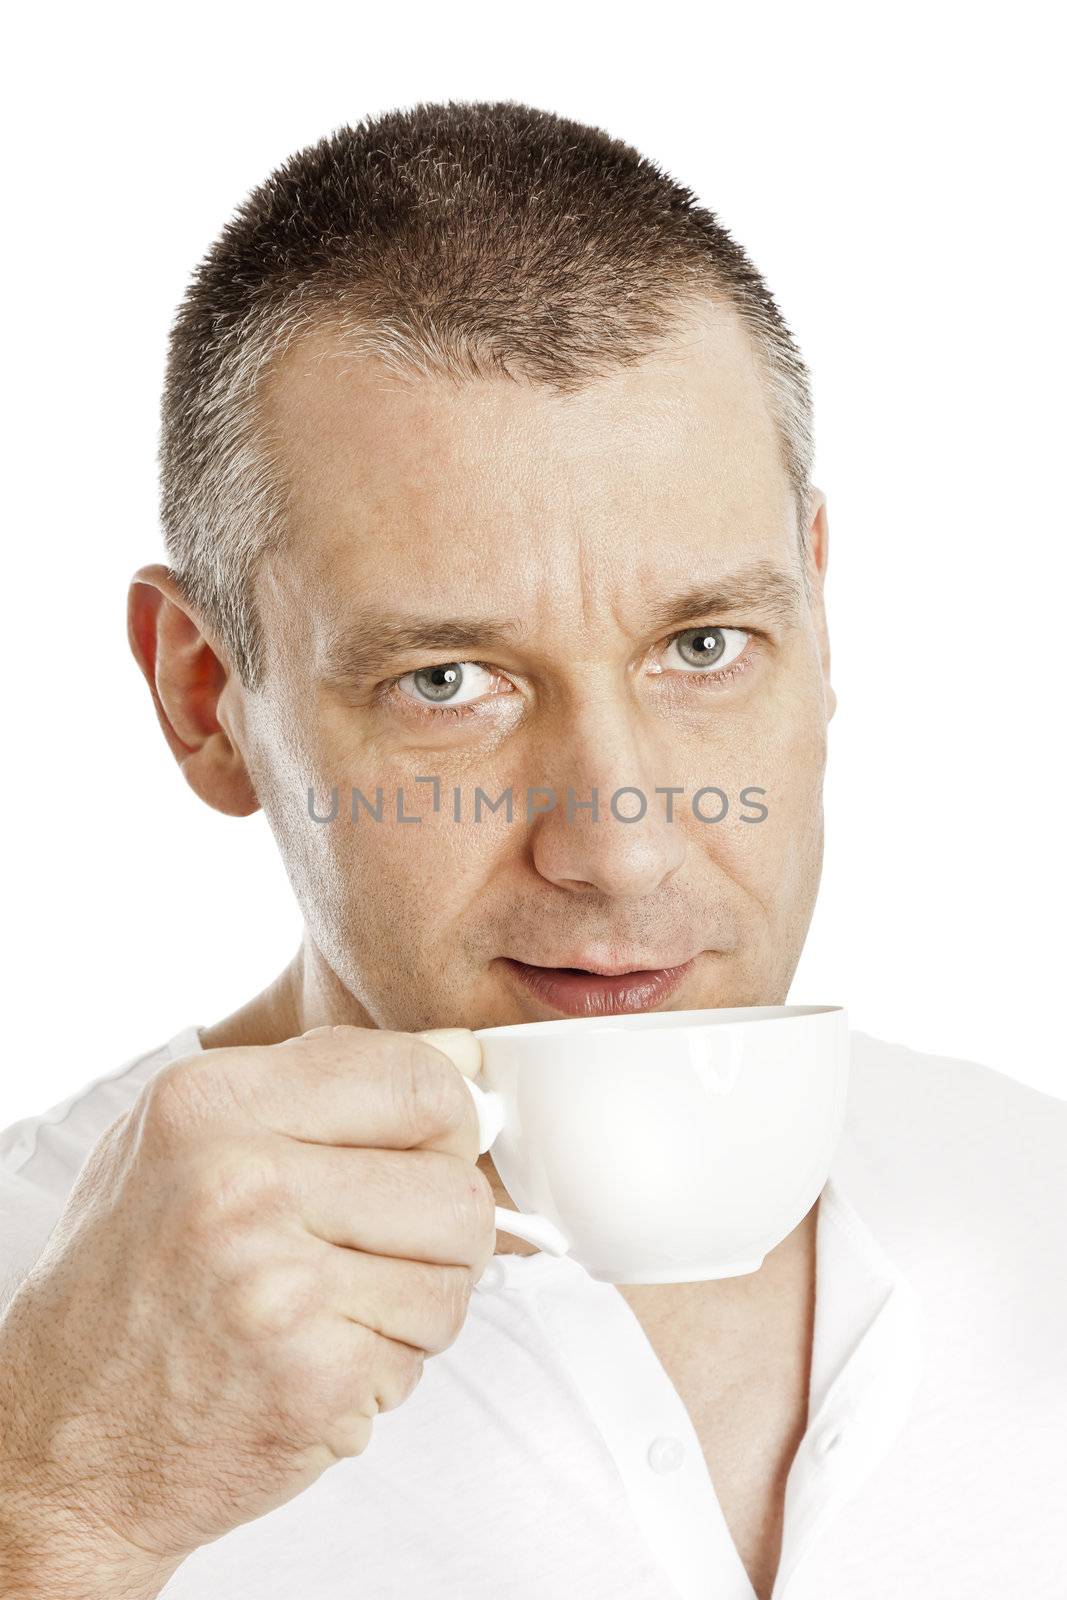 An image of a handsome middle age man with a coffee